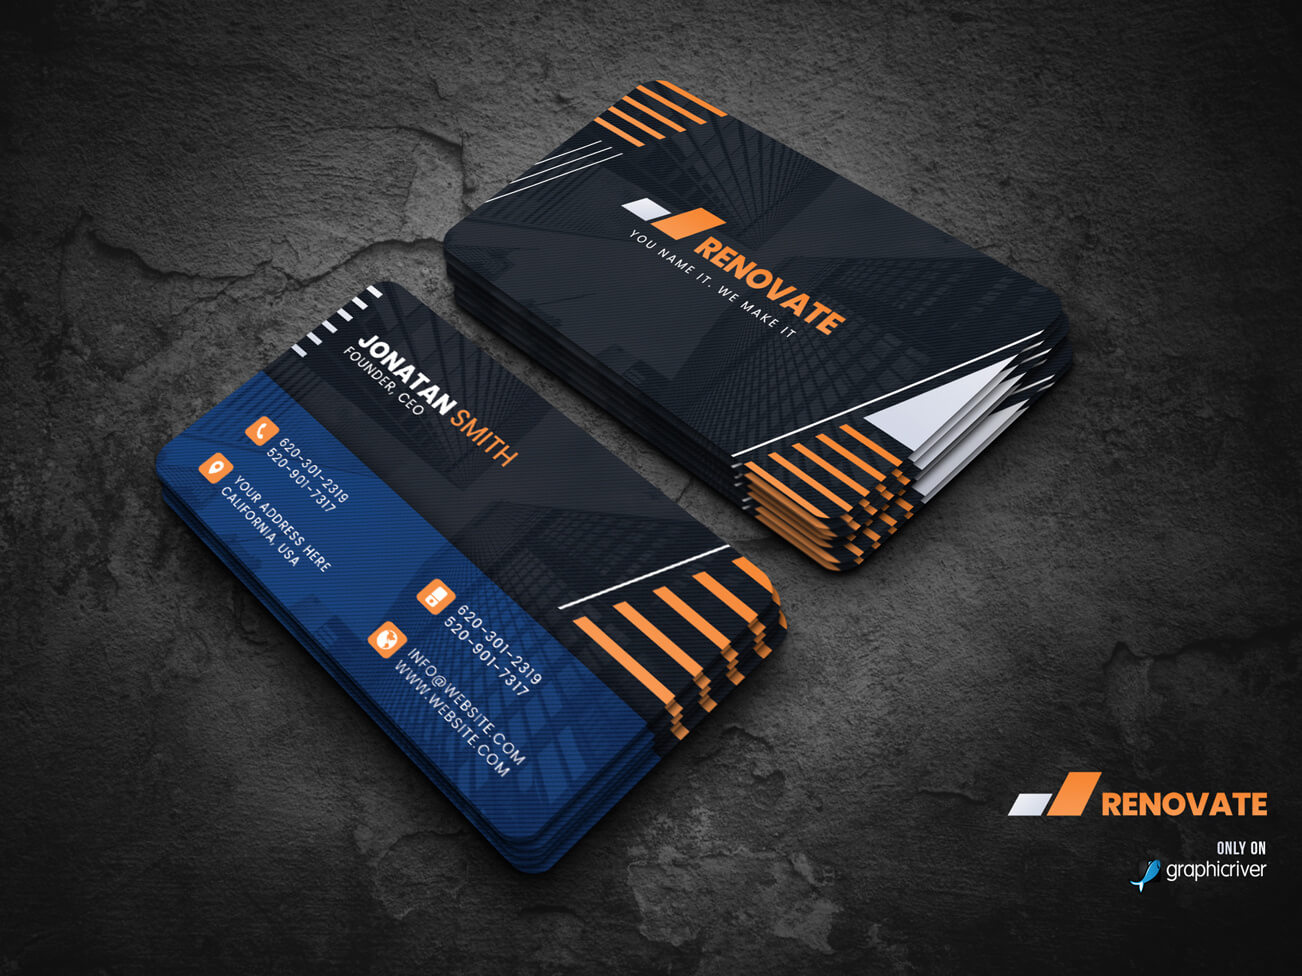 022 Photoshop Business Card Template Fantastic Ideas Throughout Photoshop Business Card Template With Bleed